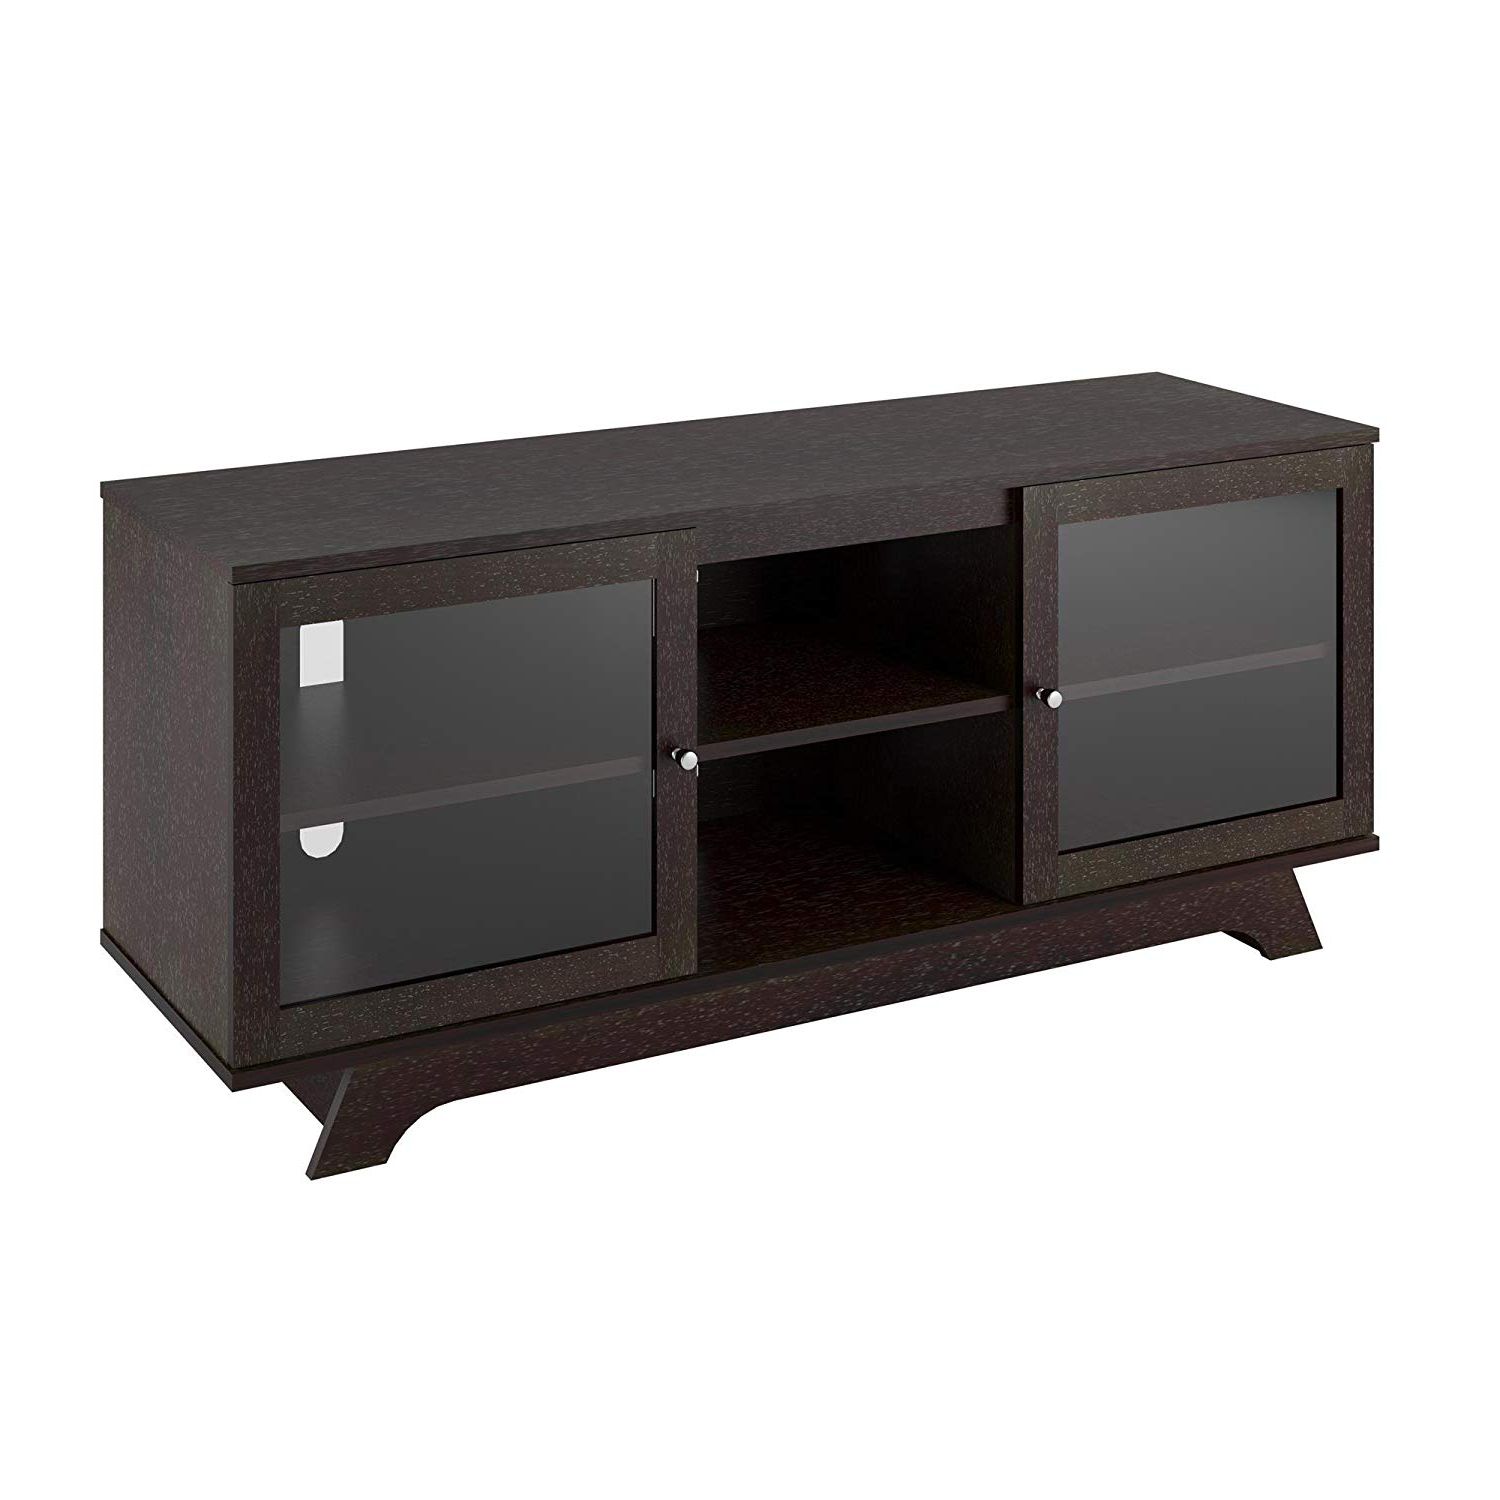 Amazon: Ameriwood Home Englewood Tv Stand For Tvs Up To 55 Regarding Popular Black And Red Tv Stands (View 17 of 20)